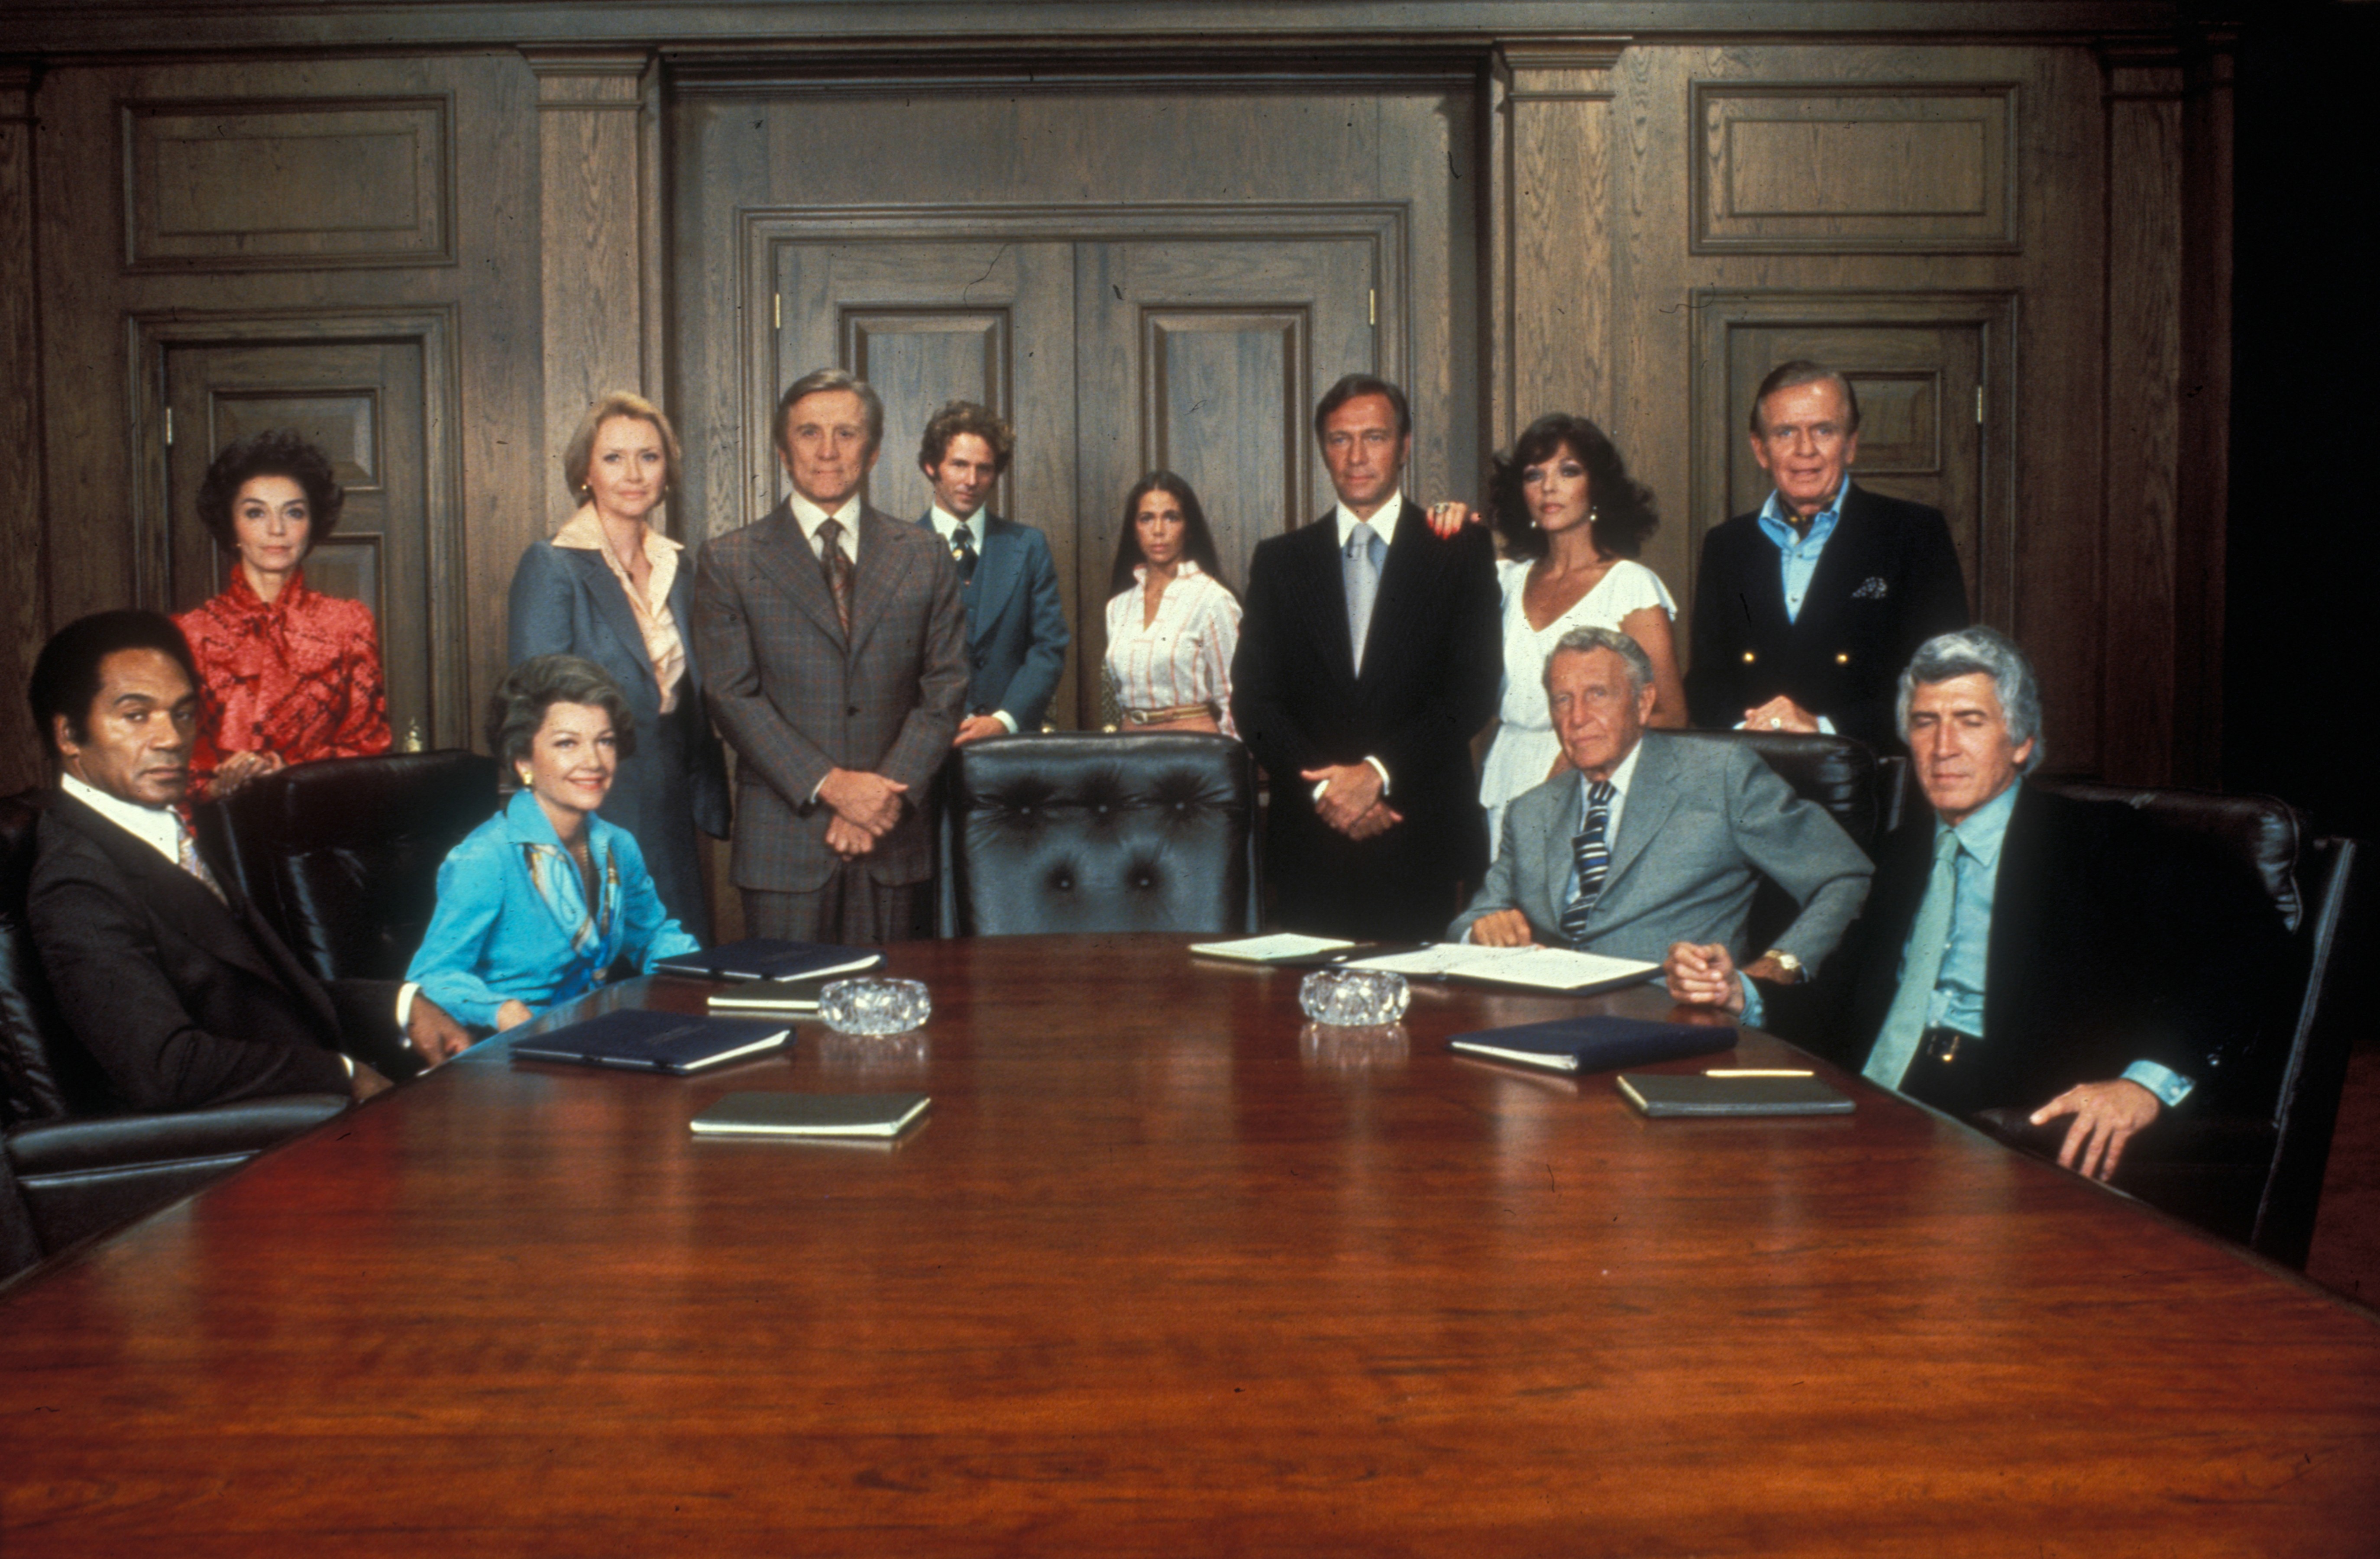 Still of Kirk Douglas, Anne Baxter, Ralph Bellamy, Timothy Bottoms, Joan Collins, Christopher Plummer, Susan Flannery, Patrick O'Neal, Percy Rodrigues, Hayden Rorke and Amy Tivell in Arthur Hailey's the Moneychangers (1976)